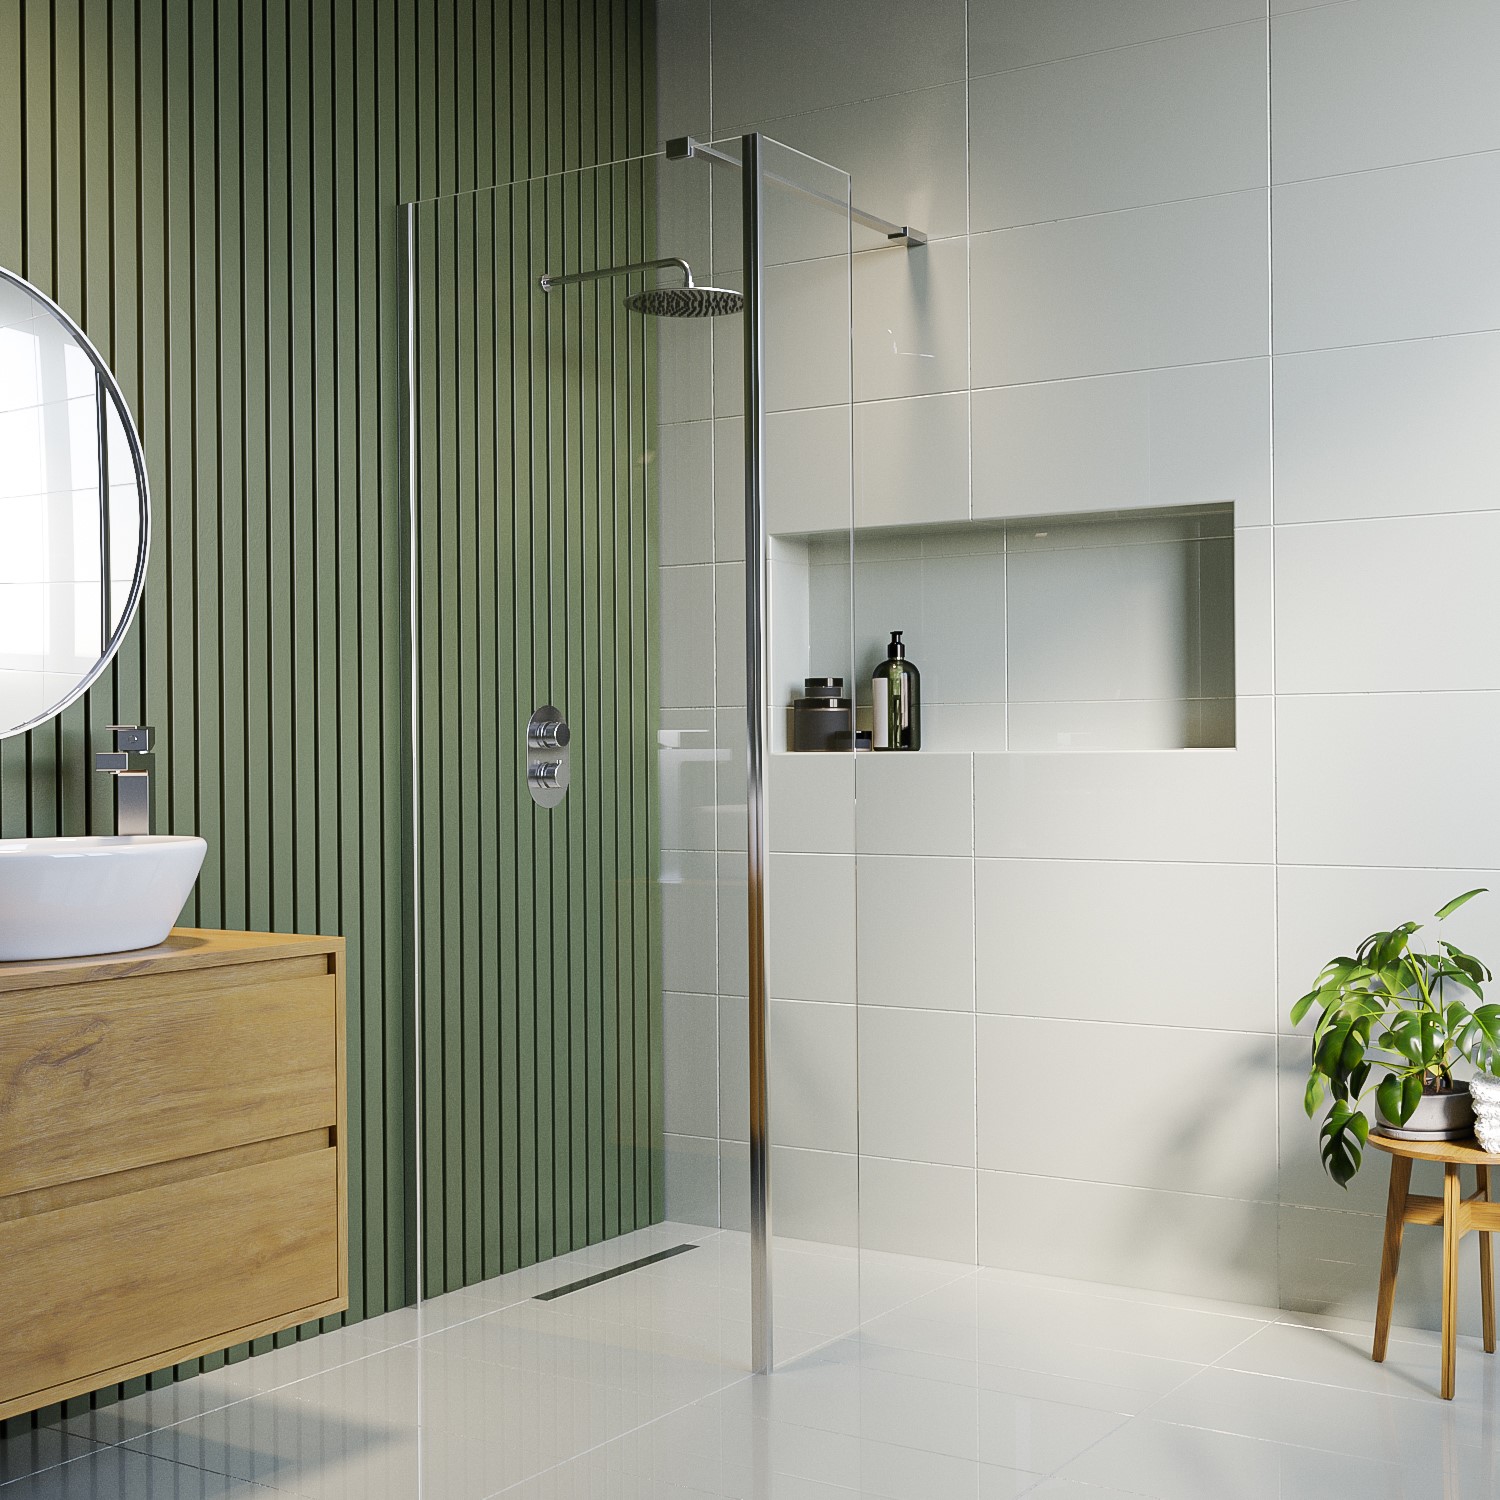 800mm Wet Room Shower Screen with Wall Support Bar & Return Panel - Corvus